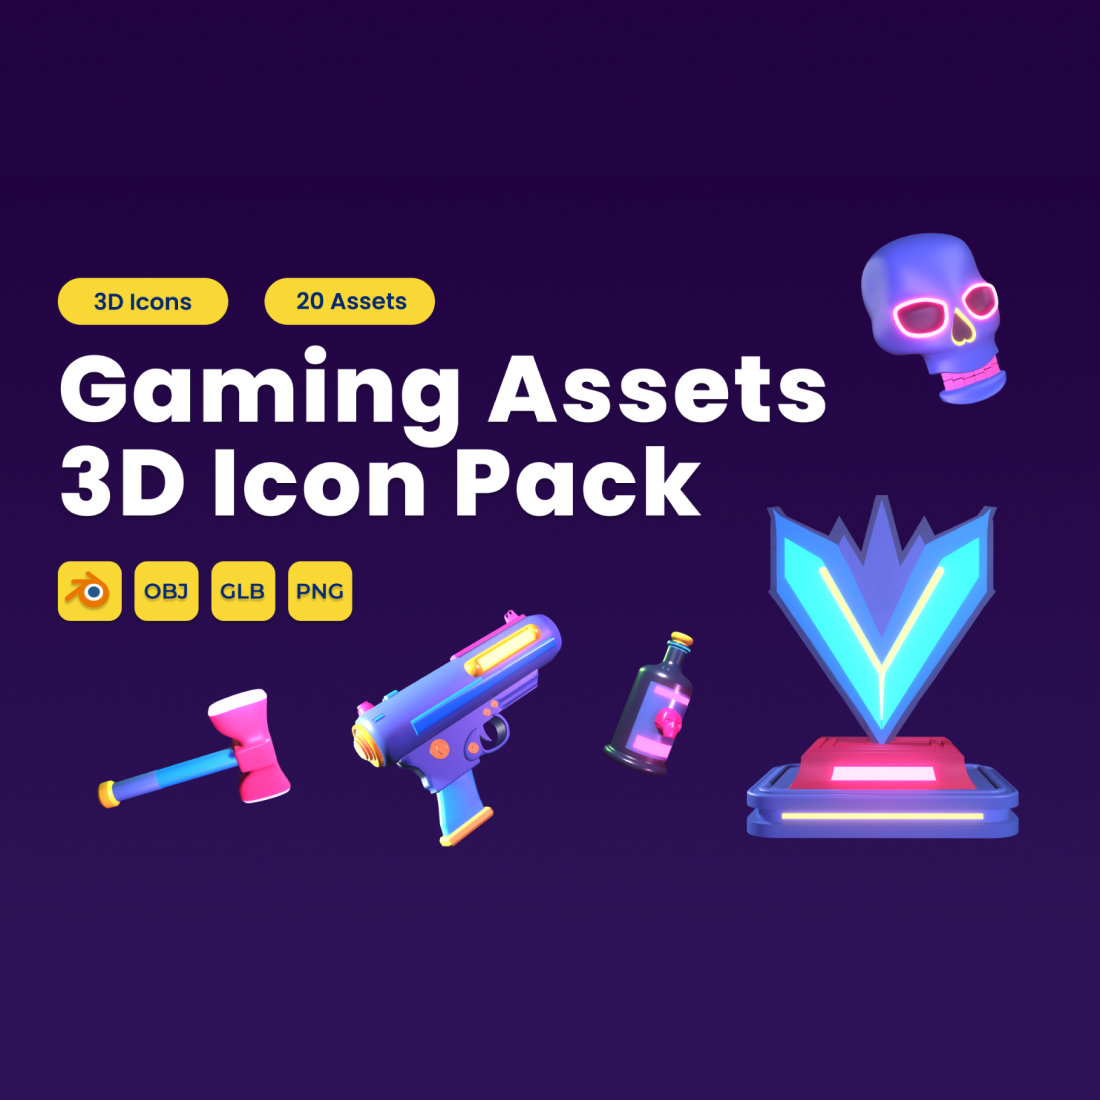 Gaming Asset 3D Icon Pack Vol 4 cover image.